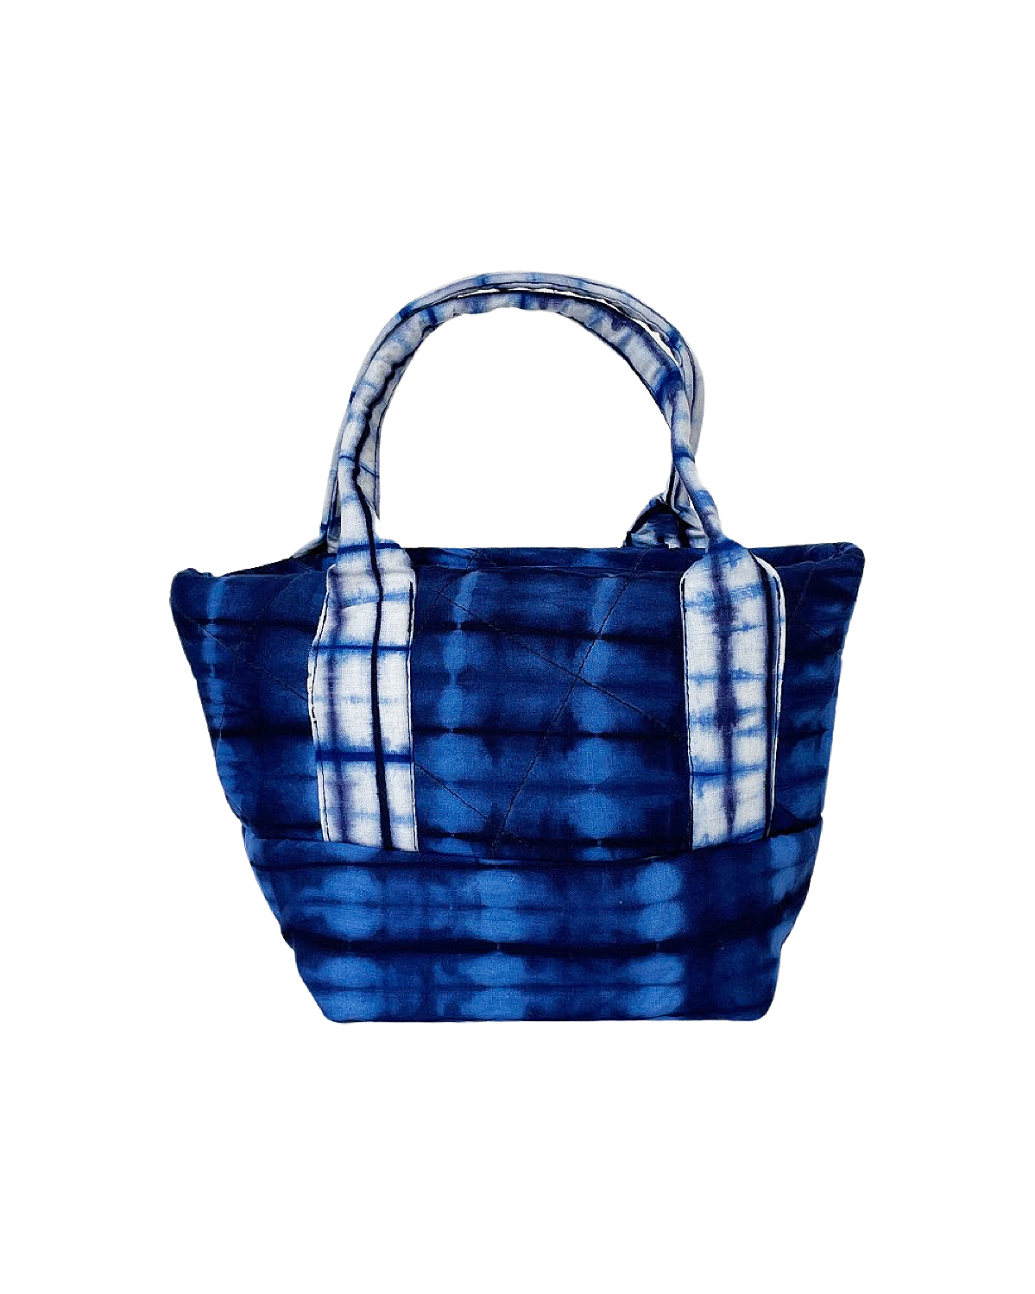 purse, vacation, outfit, tote, mini, handbag, colorful, blue, print, carryall, denim, Fashion, West Africa, Gift, travel, vacation, lounge, comfy, family, trip, luxury, Ghana, new arrivals, Studio 189, Cotton, clothing, comfy, chic